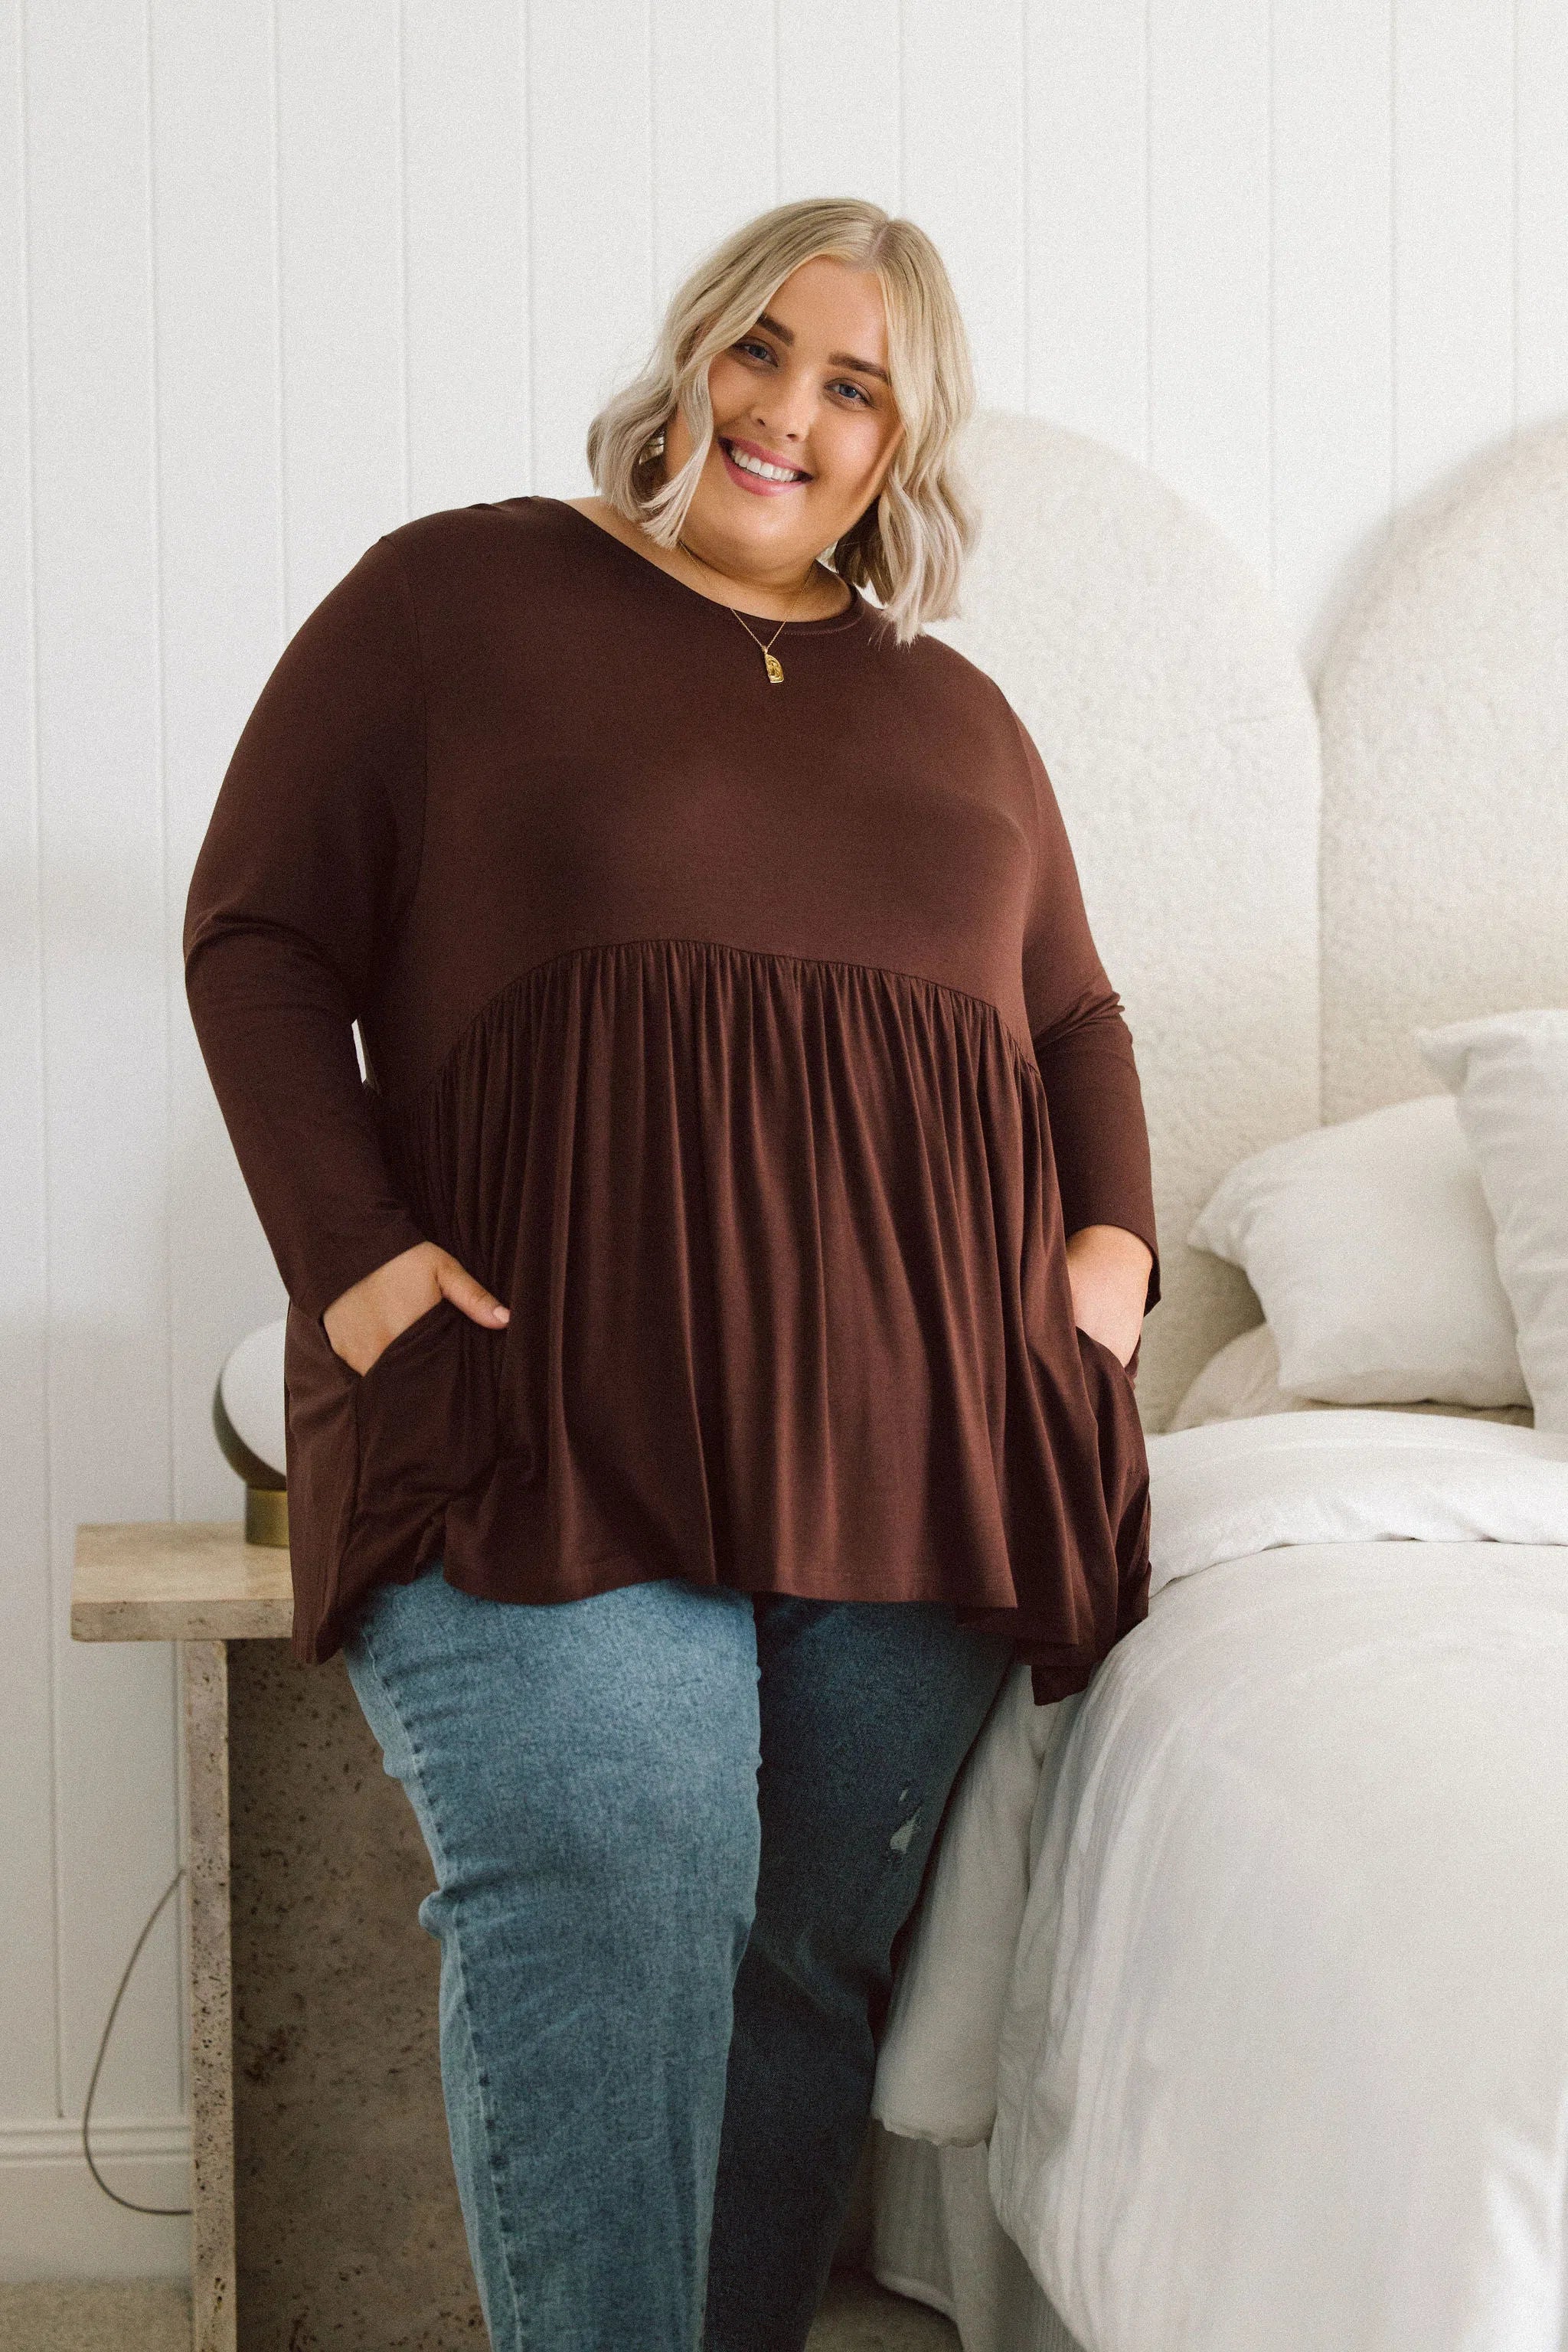 Plus Size clothing,  women modeling a winter Plus Size Tops, Lucy Long Sleeve Top in Purple chocolate brown